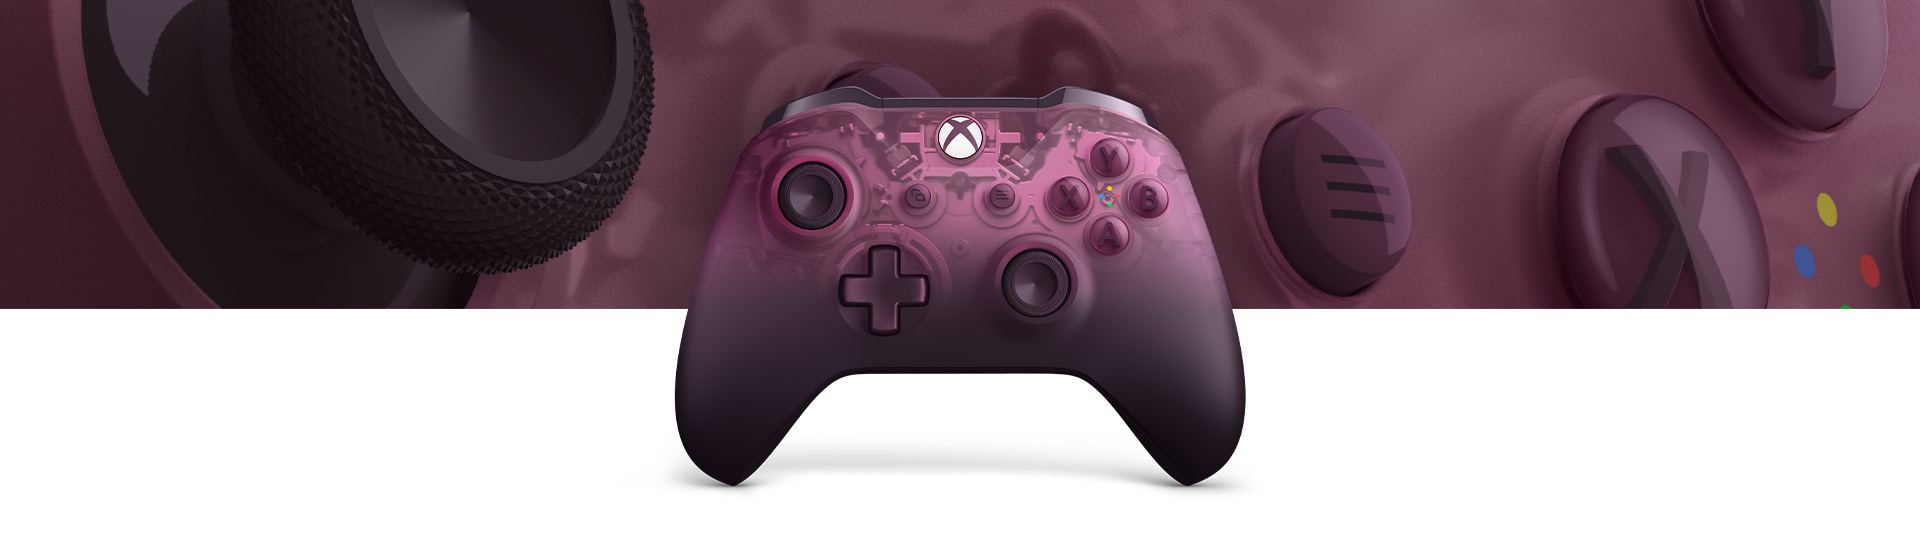 pink xbox one controller wireless